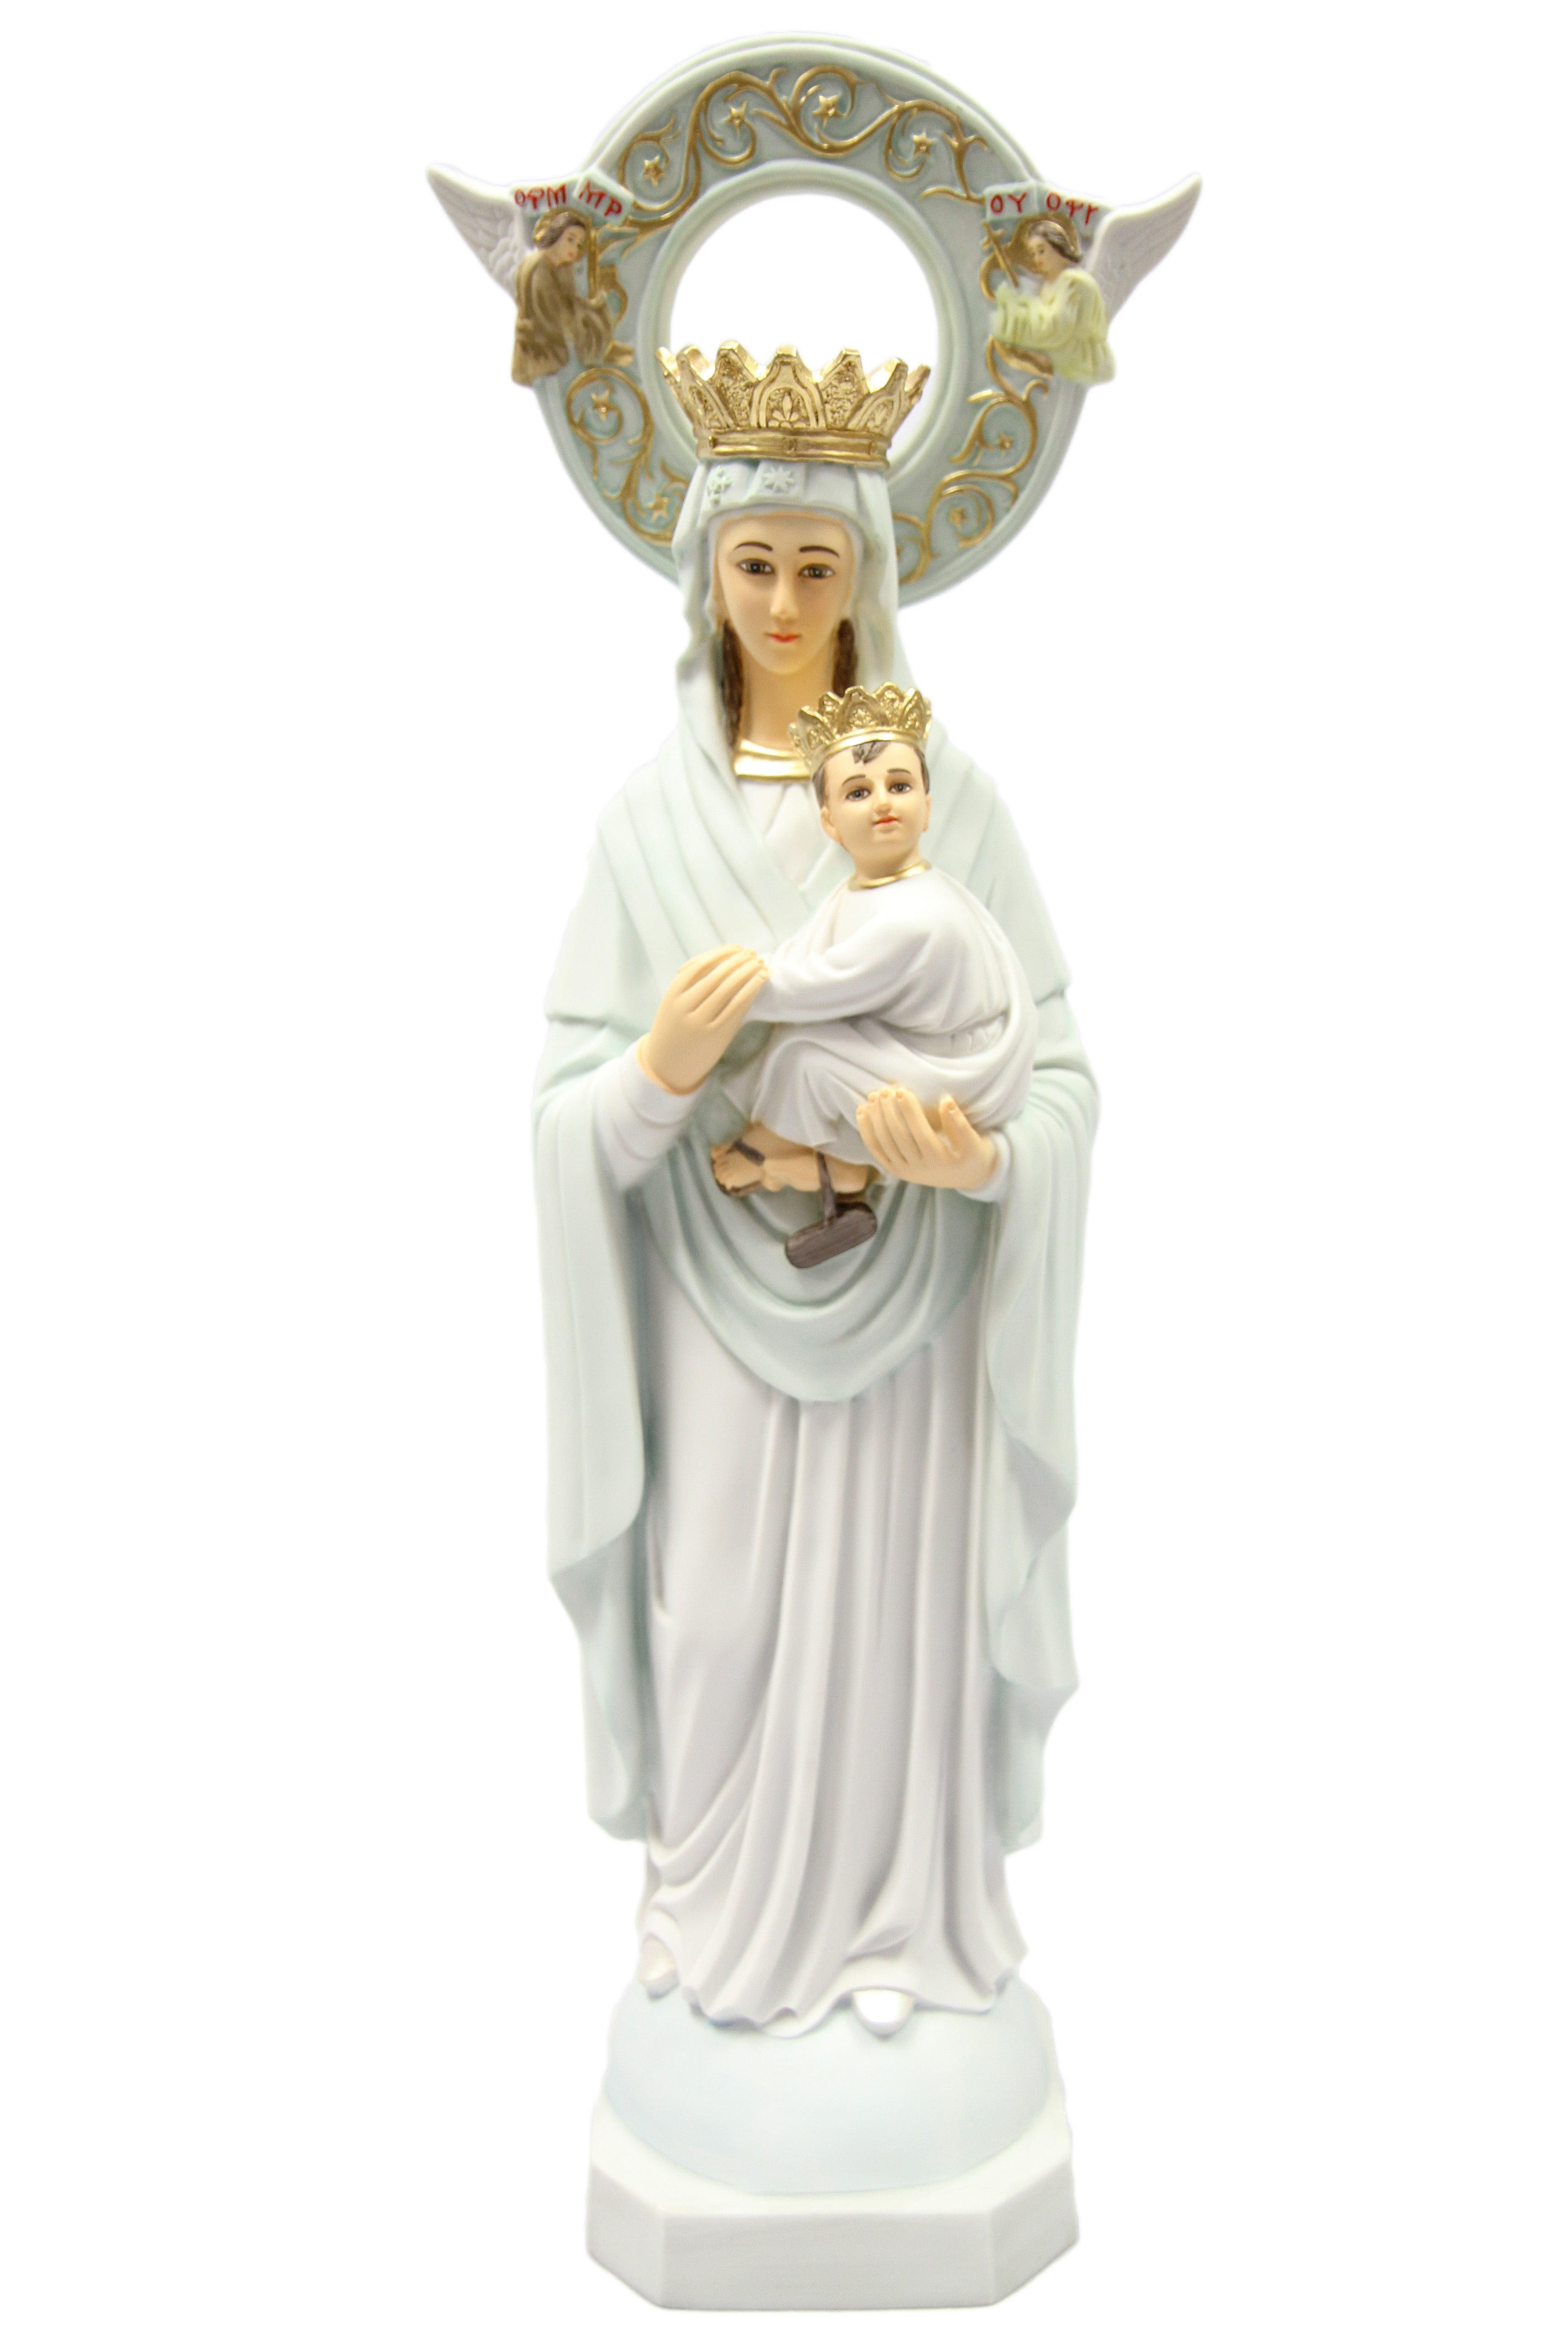 27 Inch Our Lady of Perpetual Help Virgin Mary Catholic Statue Made in Italy